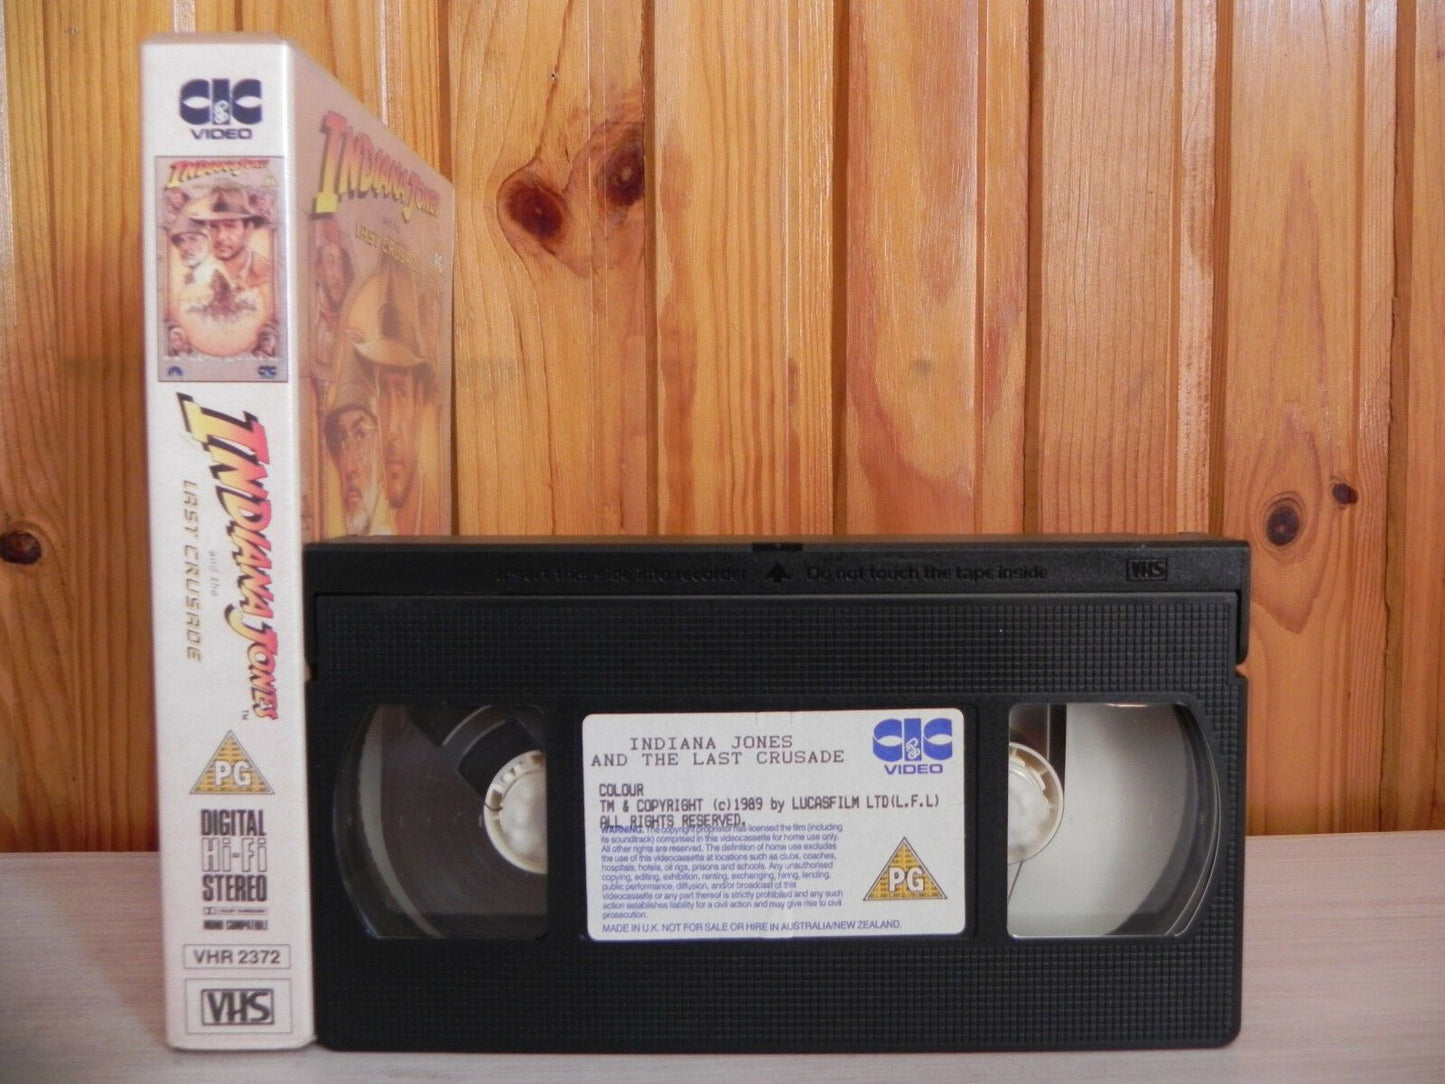 Indiana Jones [Last Crusade]: (1989) Occult Action - Harrison Ford - Pal VHS-